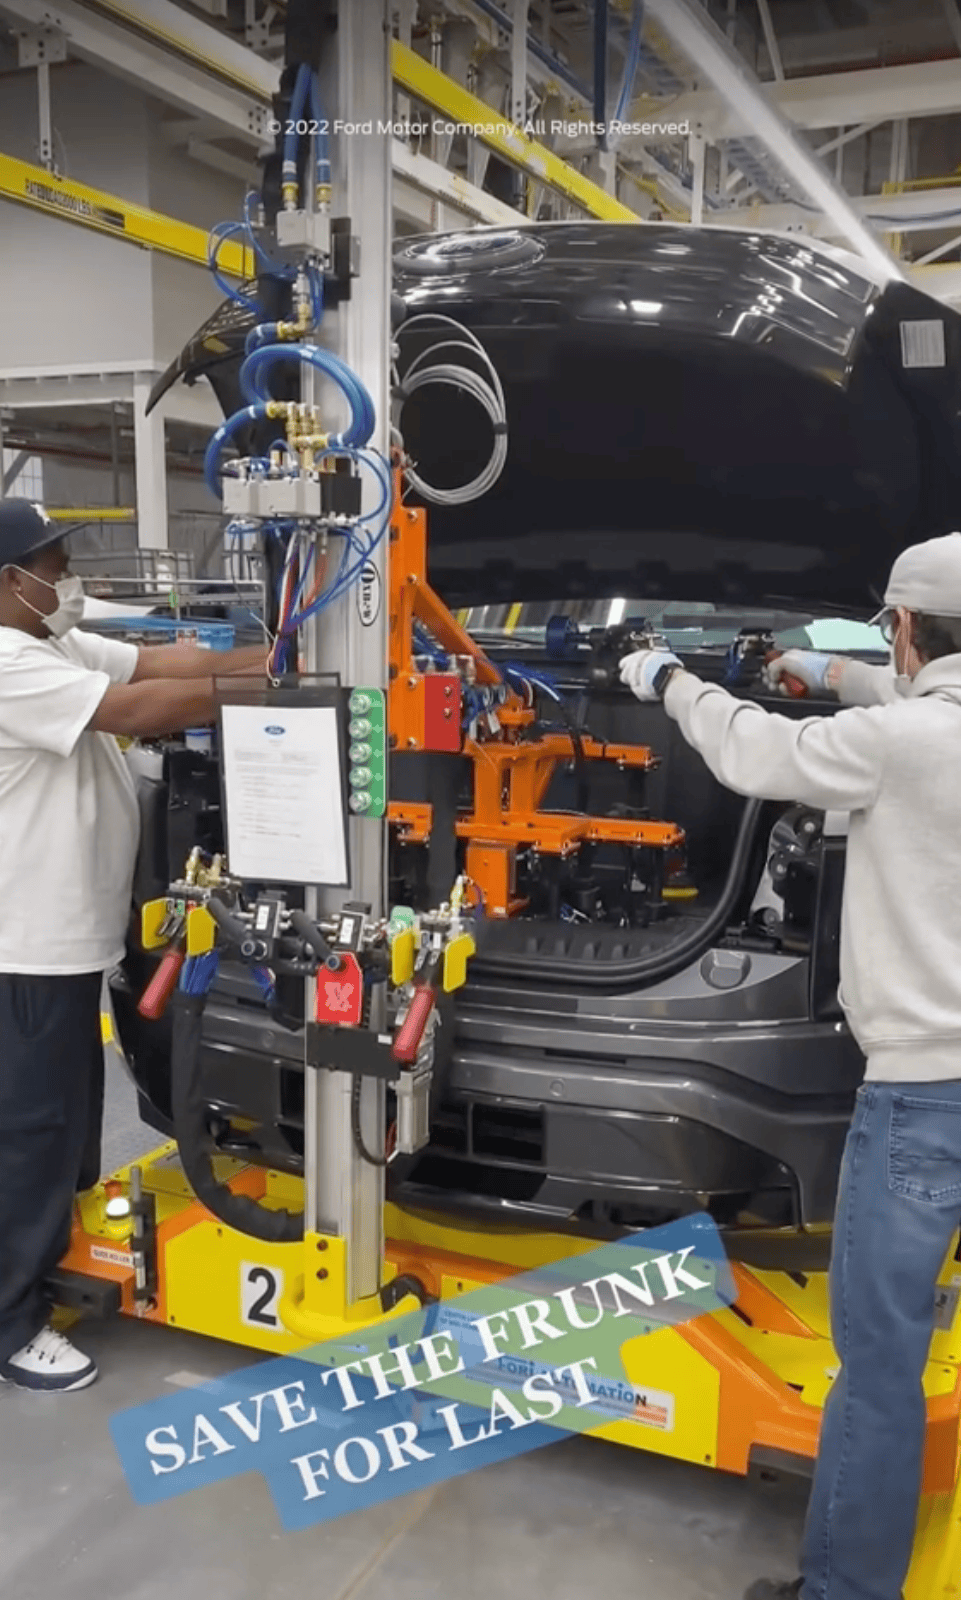 Ford F-150 Lightning F-150 Lightning Production Assembly Plant Video Shared by Ford on Tiktok f150 lightning production assembly line plant 2